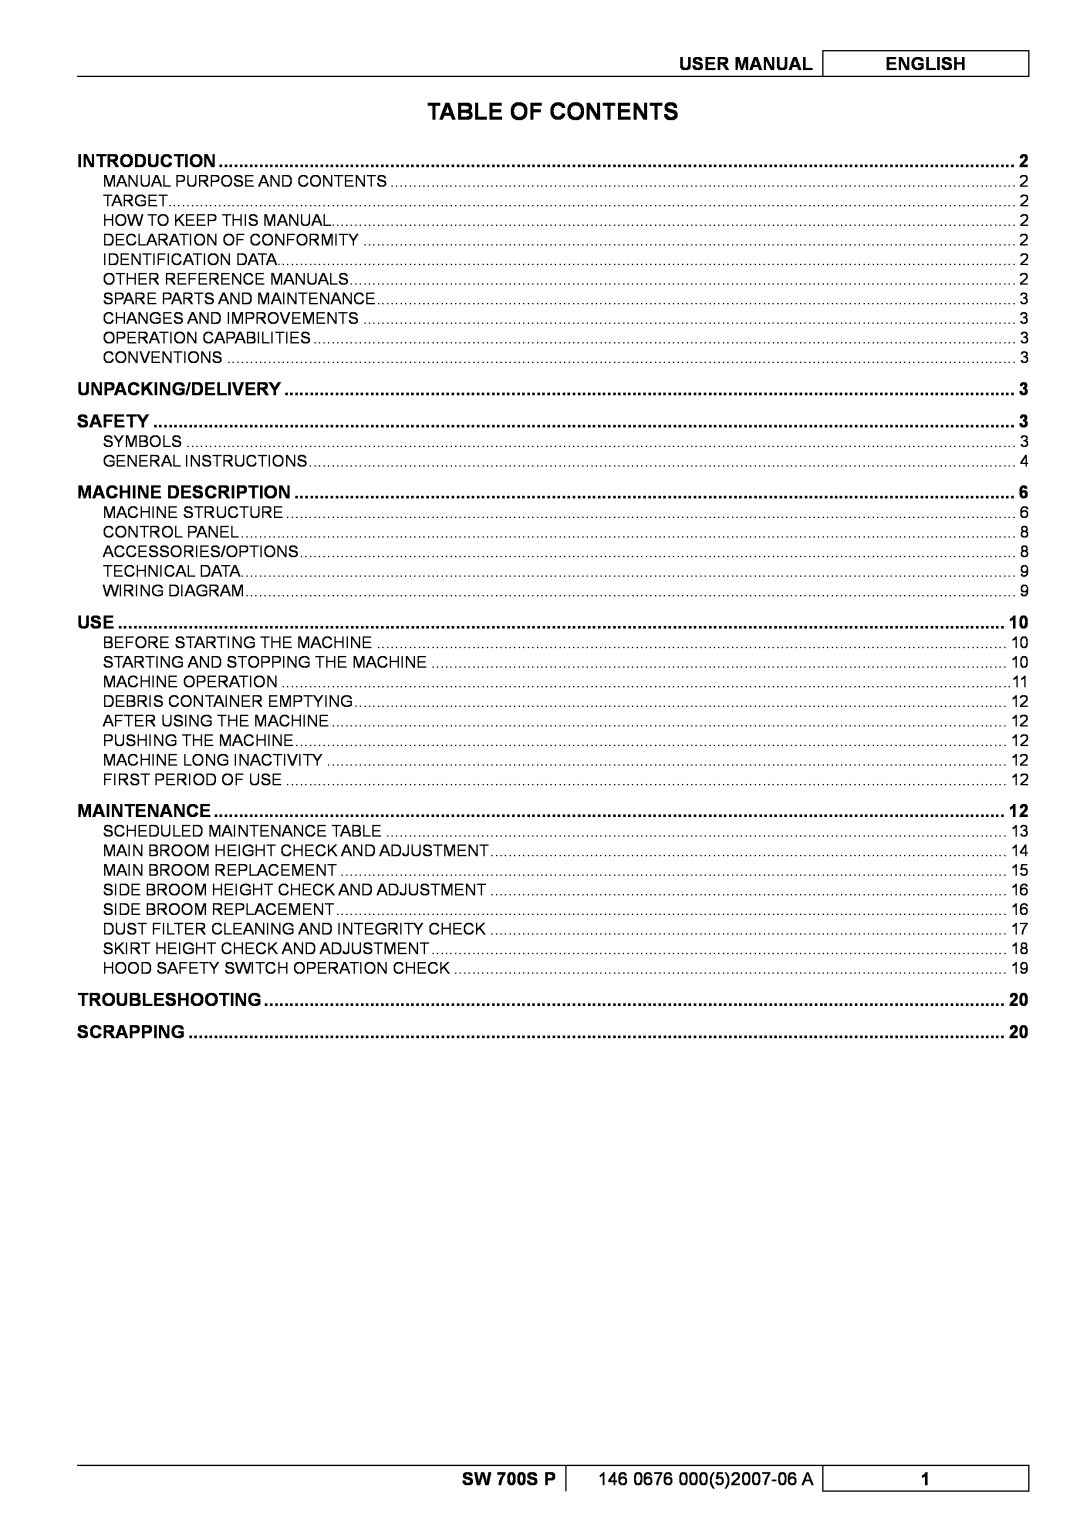 Nilfisk-Advance America SW 700S P manuel dutilisation Table Of Contents, User Manual, English 